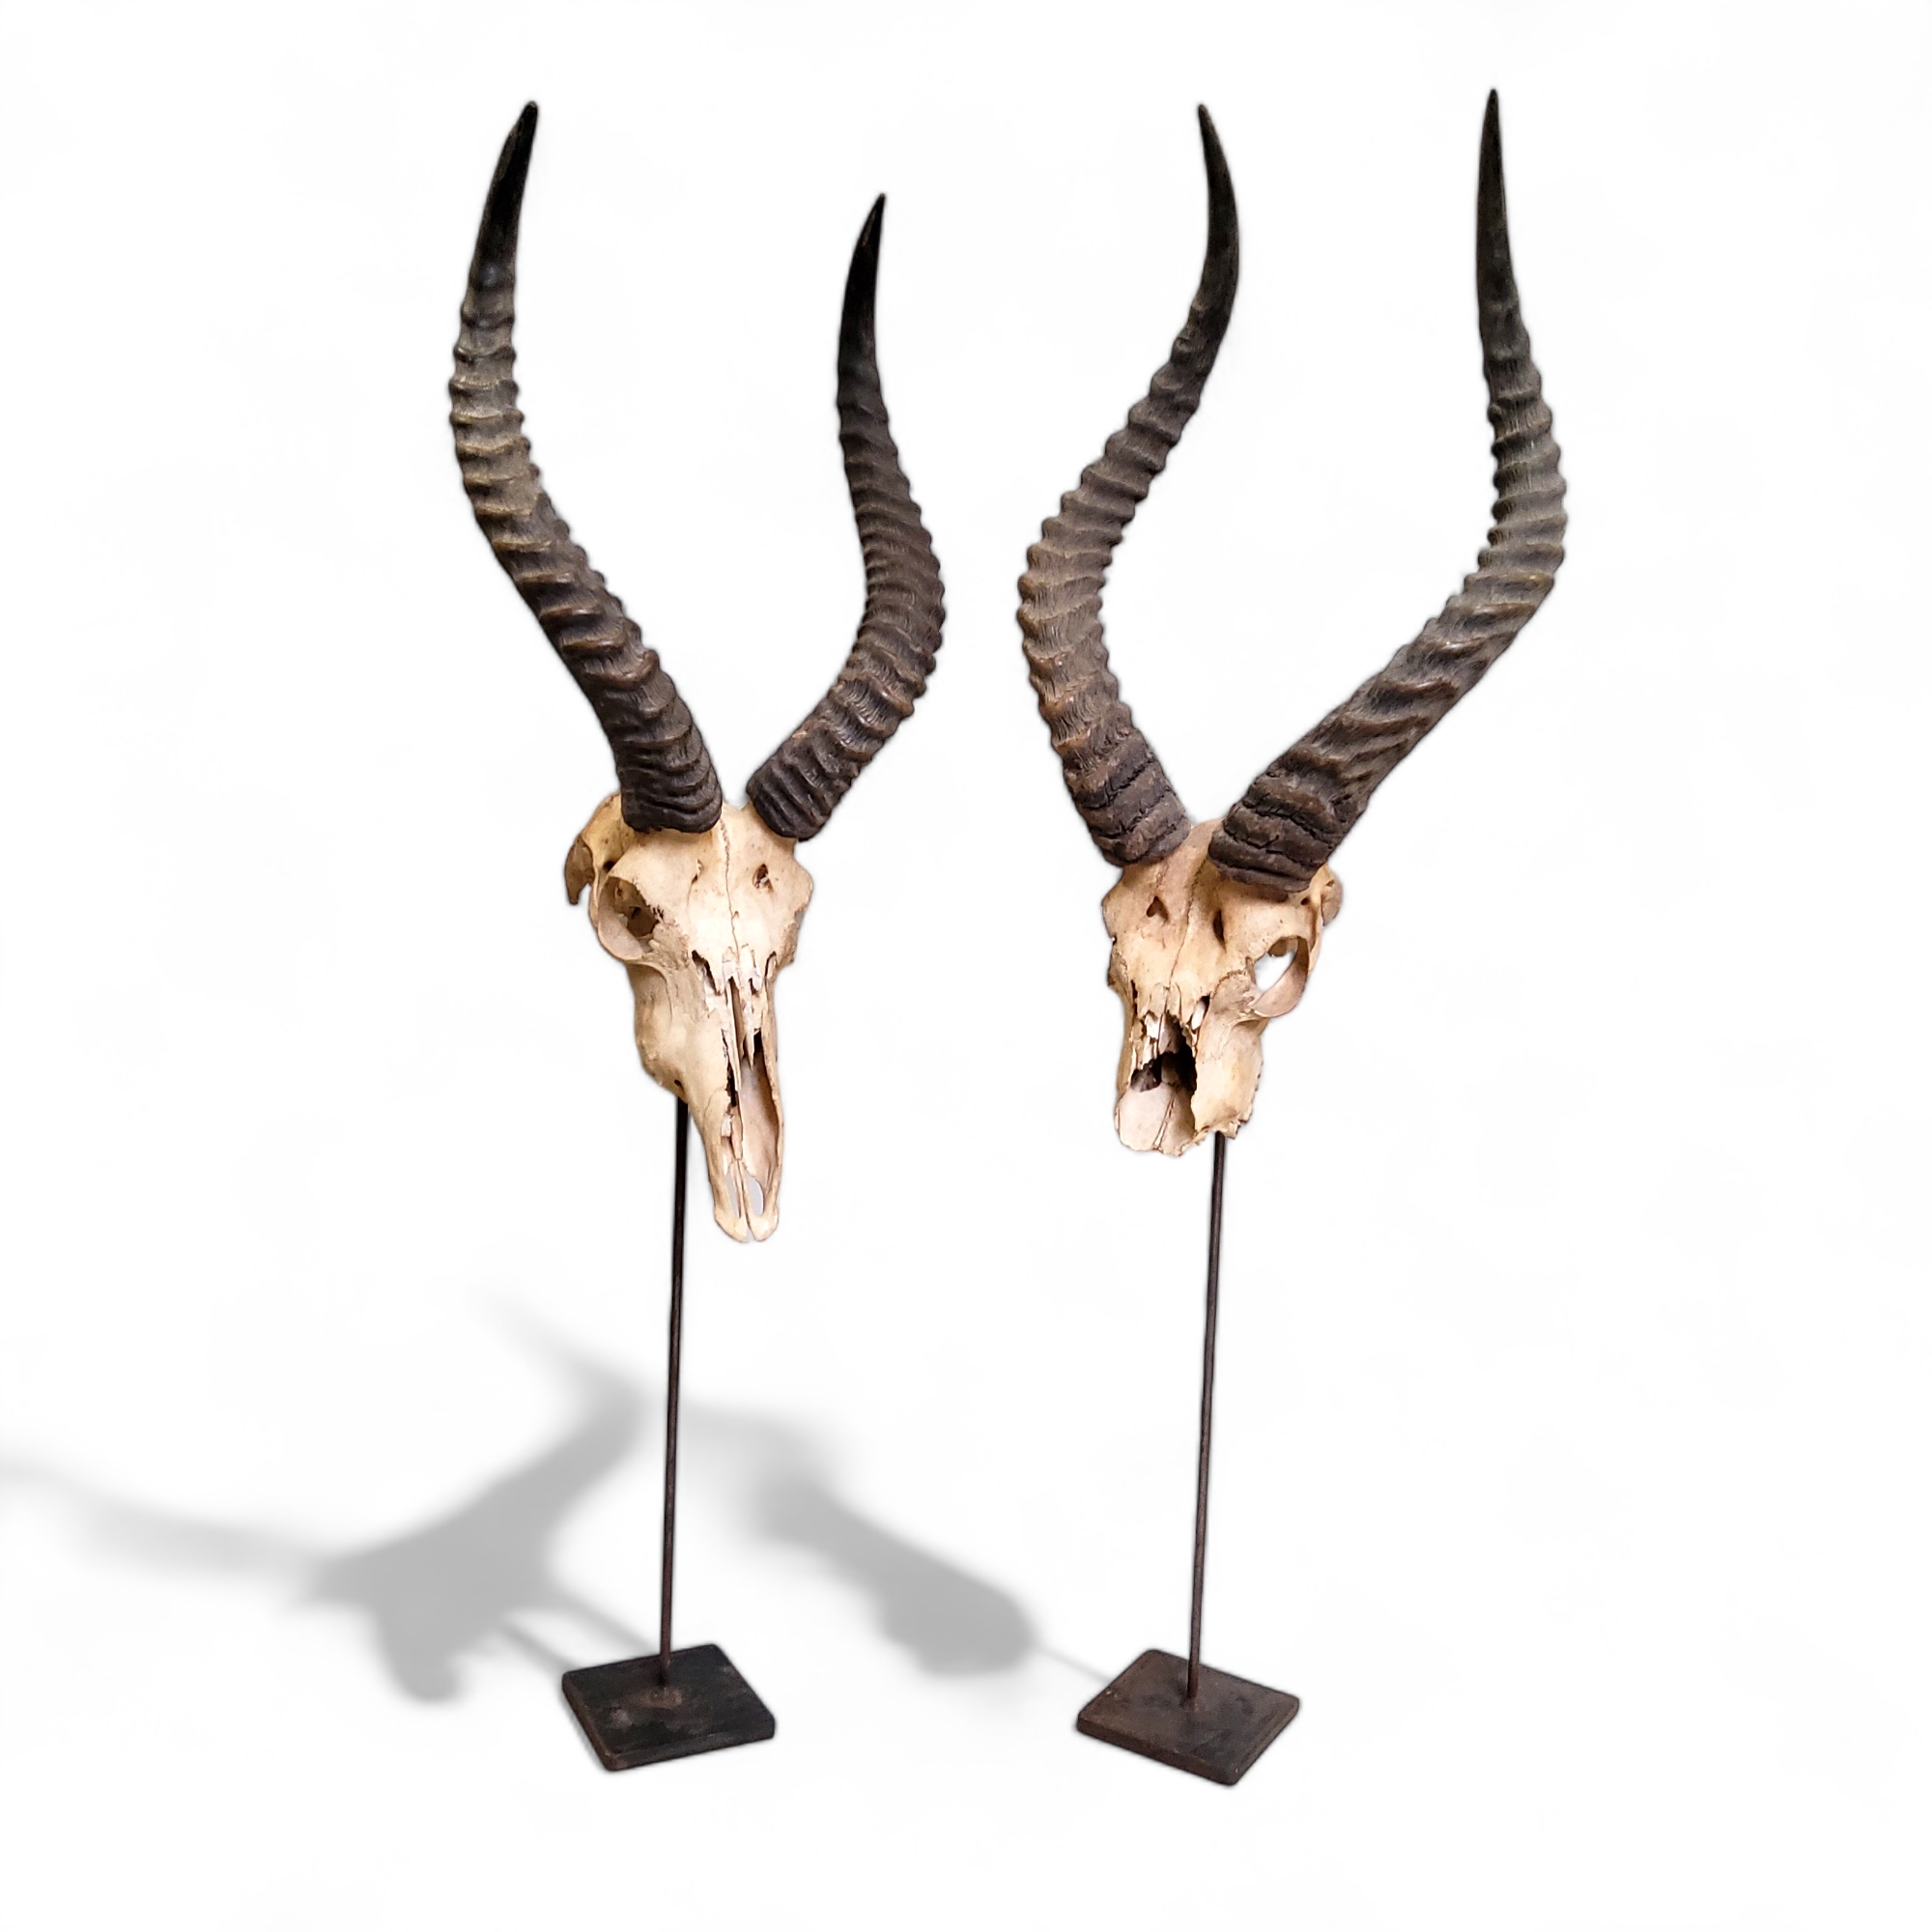 A near pair of large Impala skulls mounted on iron plinth bases, each approximately 90cm high